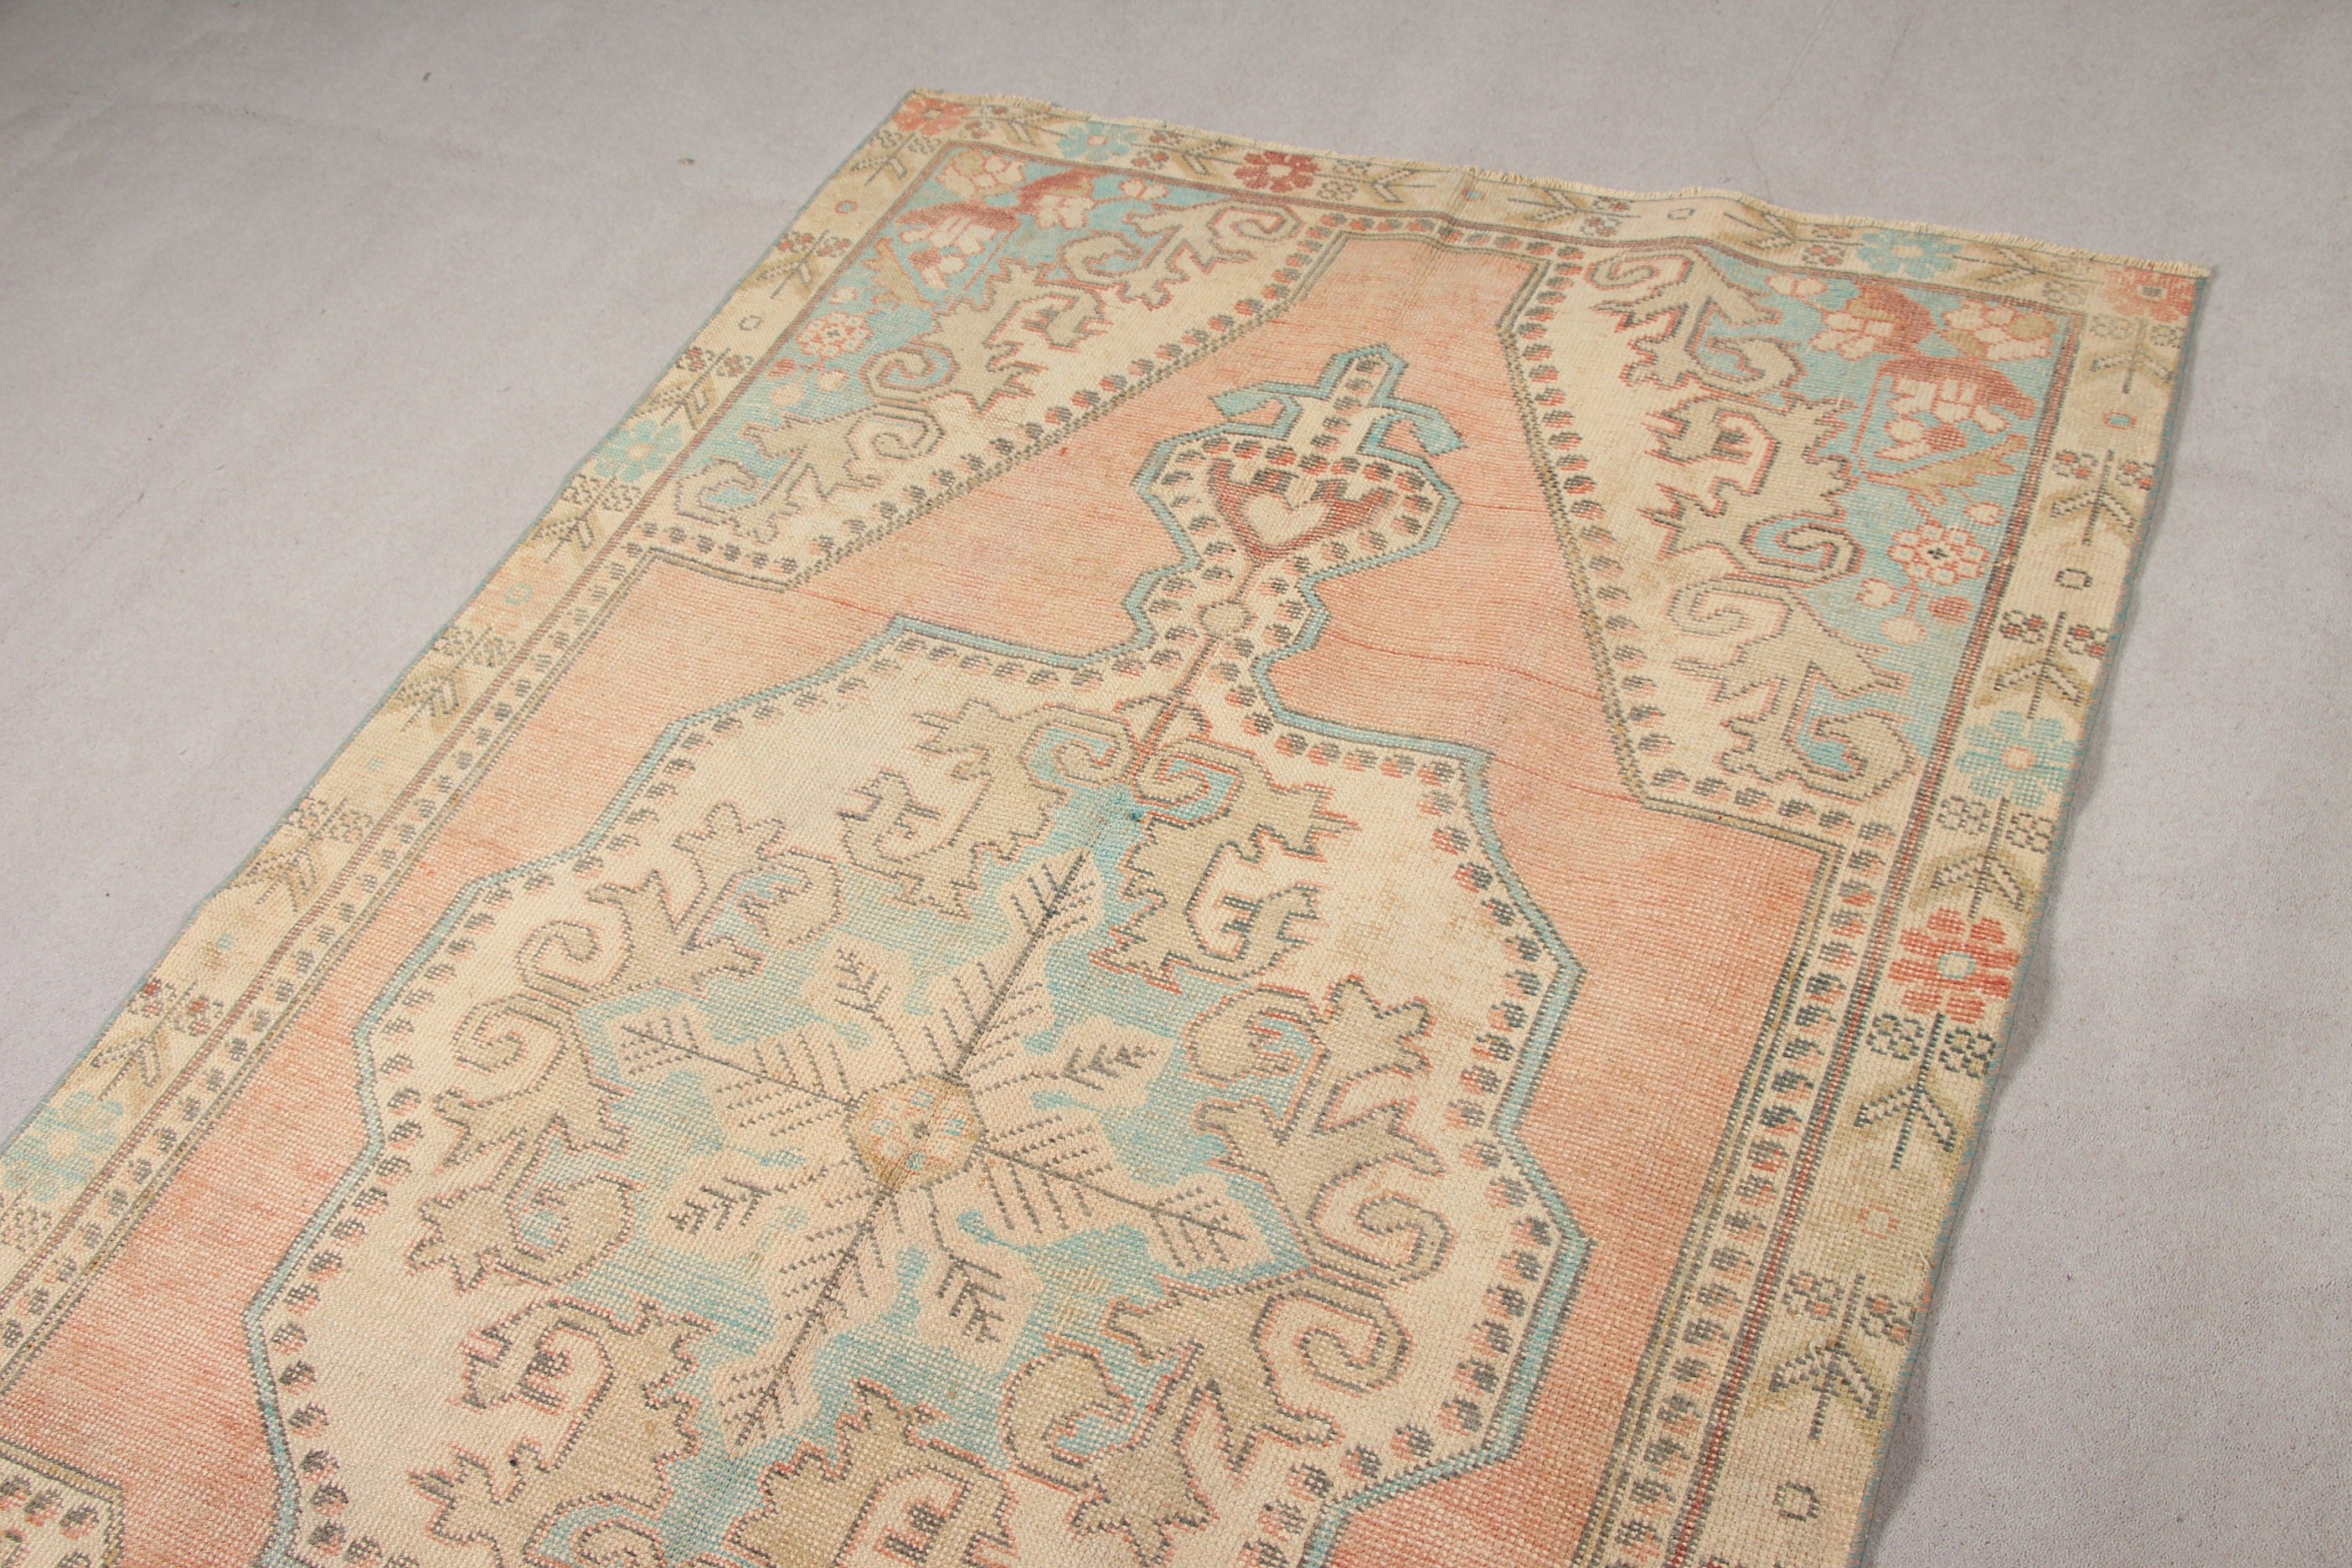 Kitchen Rug, Cool Rugs, Pale Rugs, Anatolian Rugs, Turkish Rug, Vintage Rugs, Dining Room Rugs, Pink  4.1x7.2 ft Area Rug